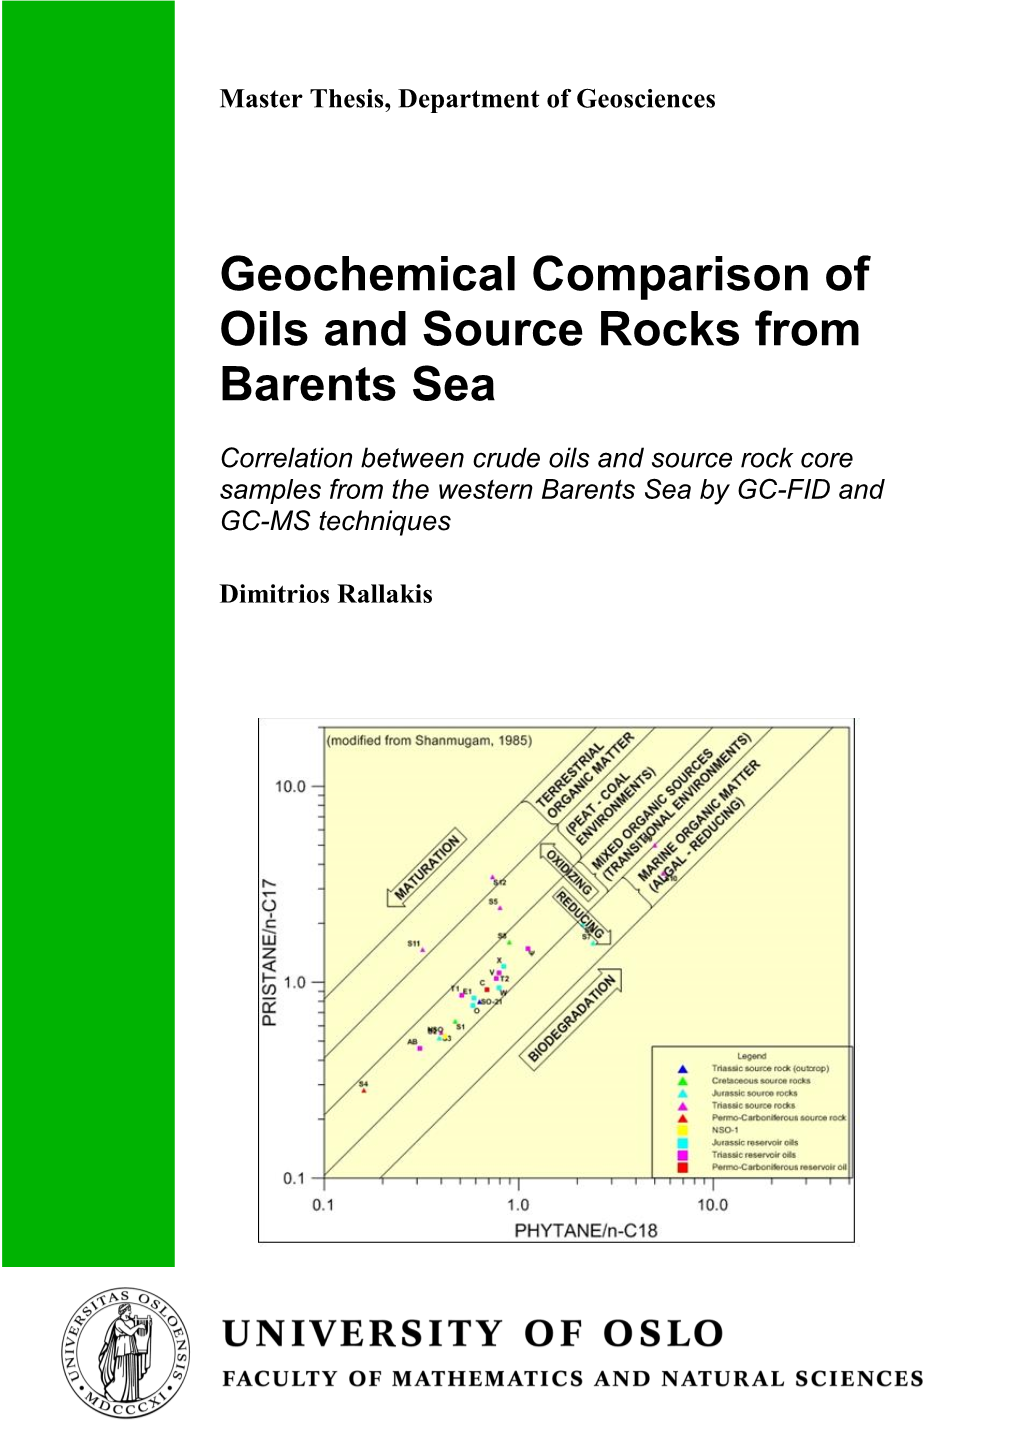 Geochemical Comparison of Oils and Source Rocks from Barents Sea